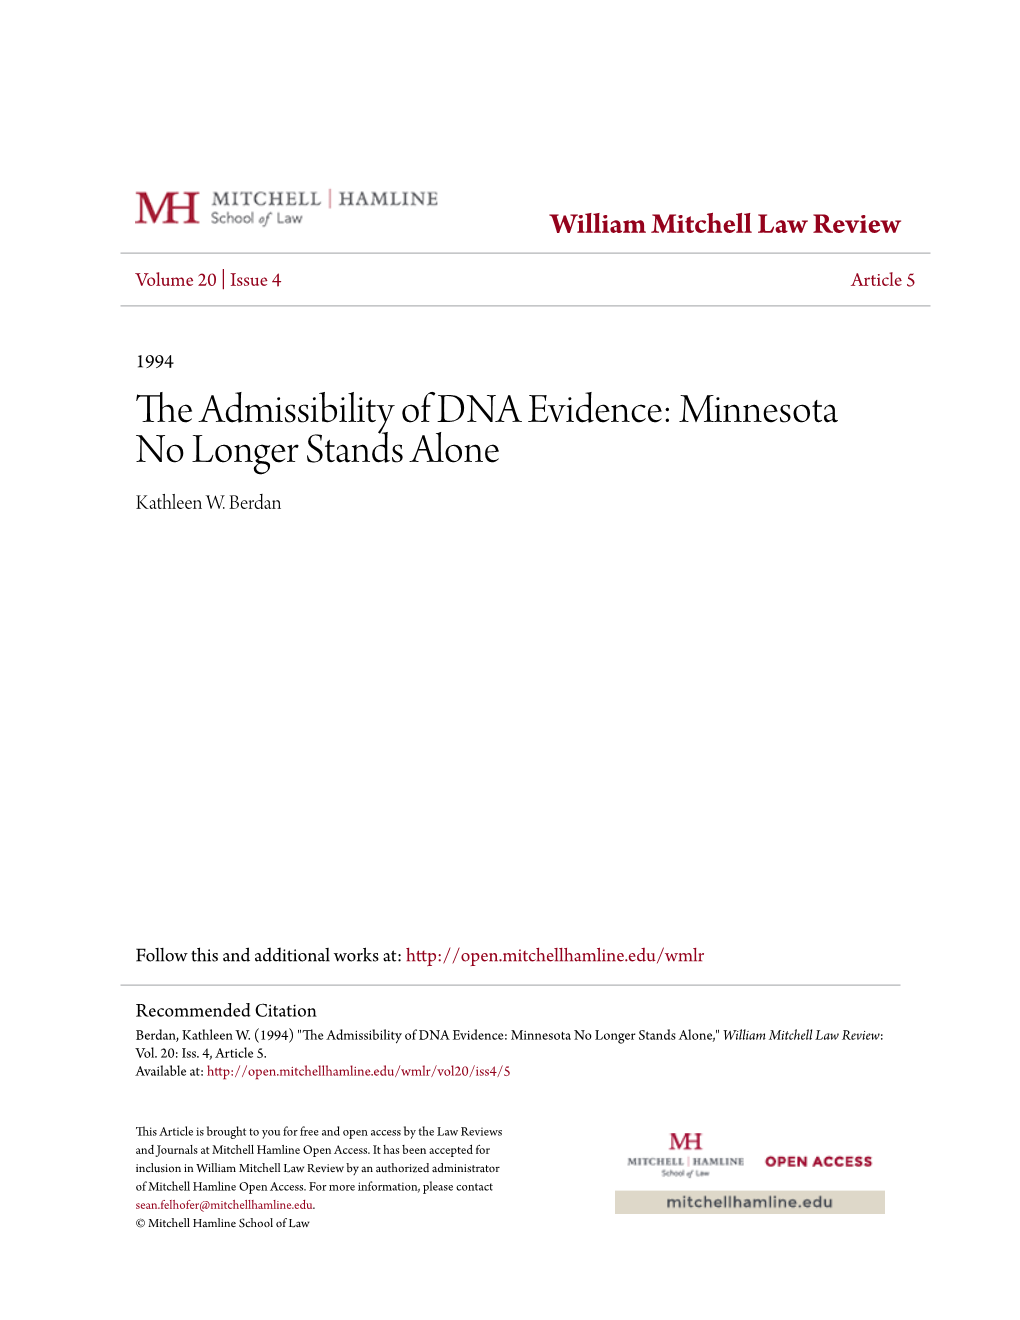 The Admissibility of DNA Evidence: Minnesota No Longer Stands Alone Kathleen W